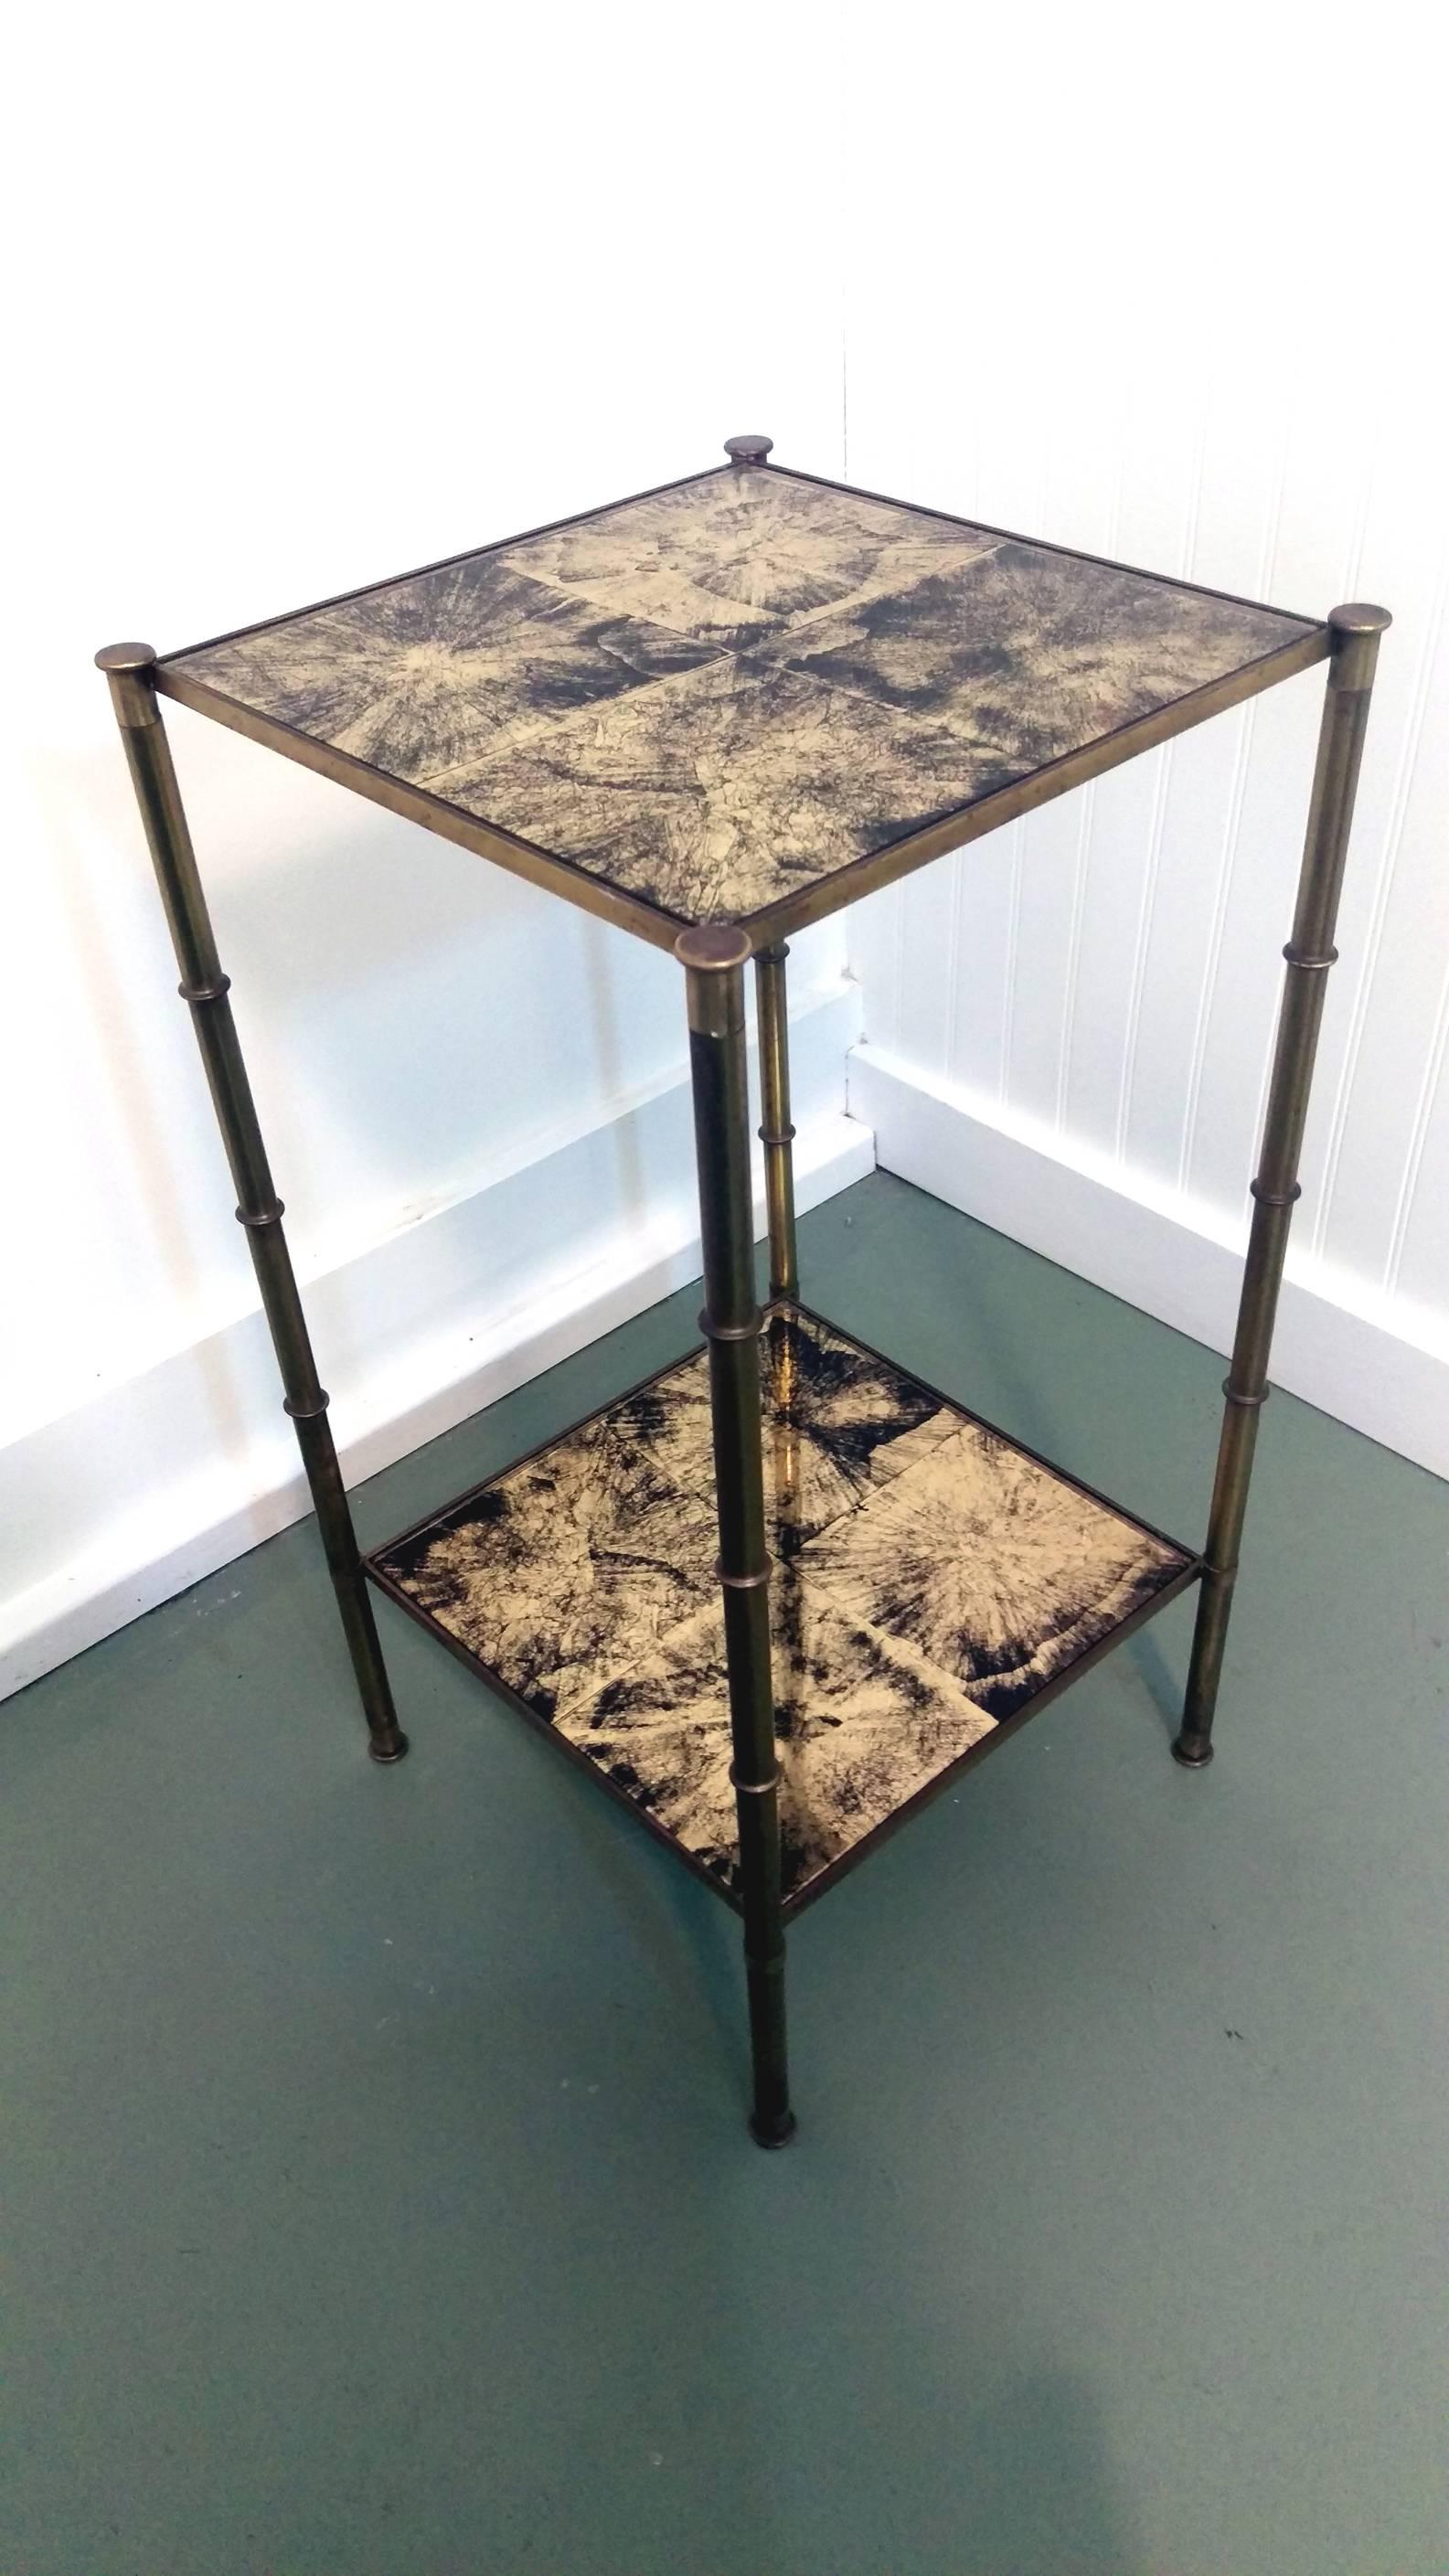 A elegant French Baguès style faux bamboo brass side table, original patina brass frame complimented by gilt églomisé glass top and shelve, circa 1950s. There is a tiny chip on one the glass underside, but neither it shown on the surface, nor the